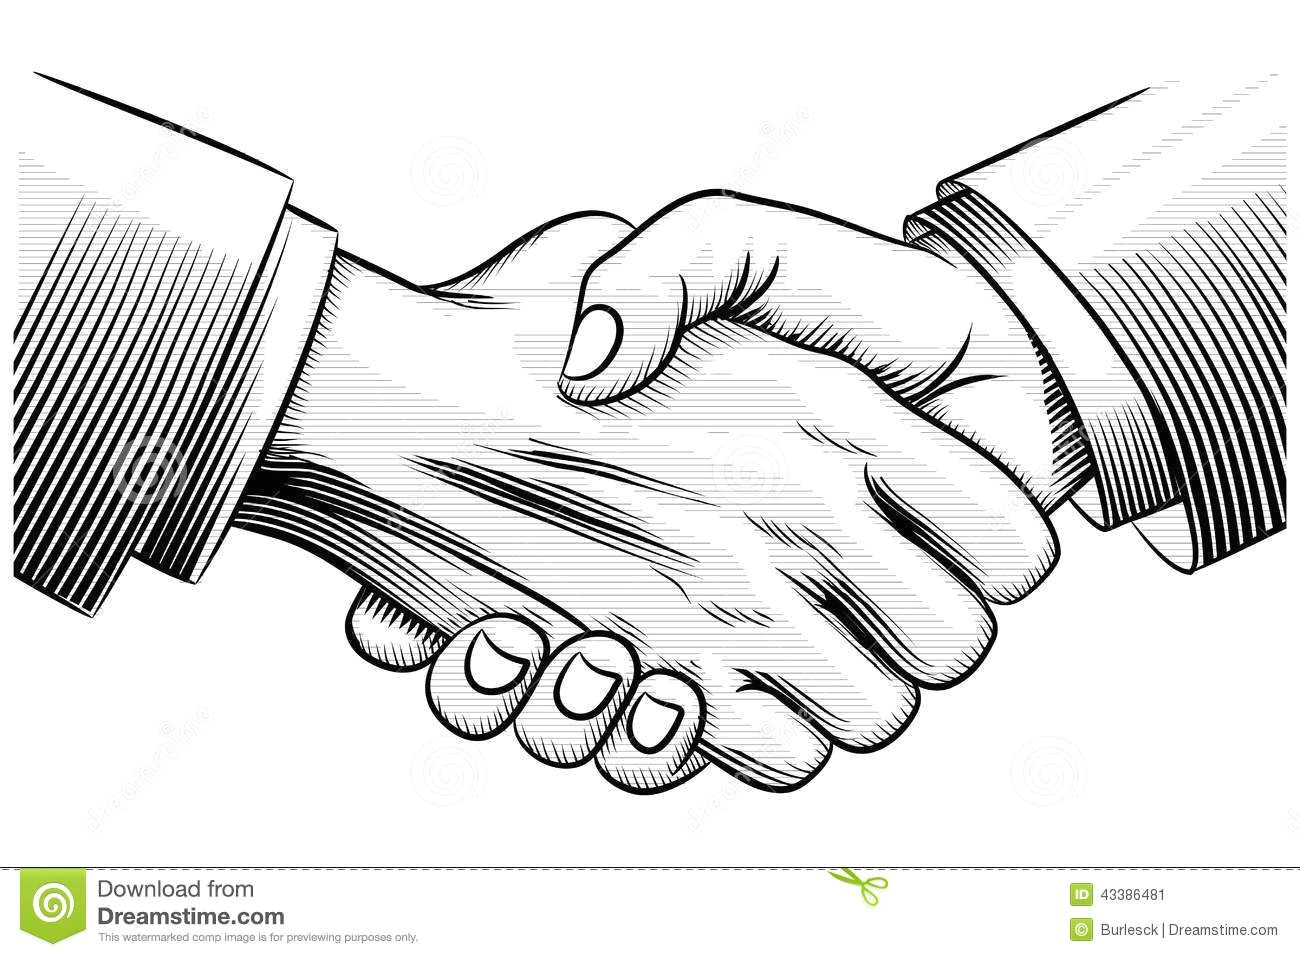 Drawings Of Handshakes Sketch Handshake Download From Over 35 Million High Quality Stock